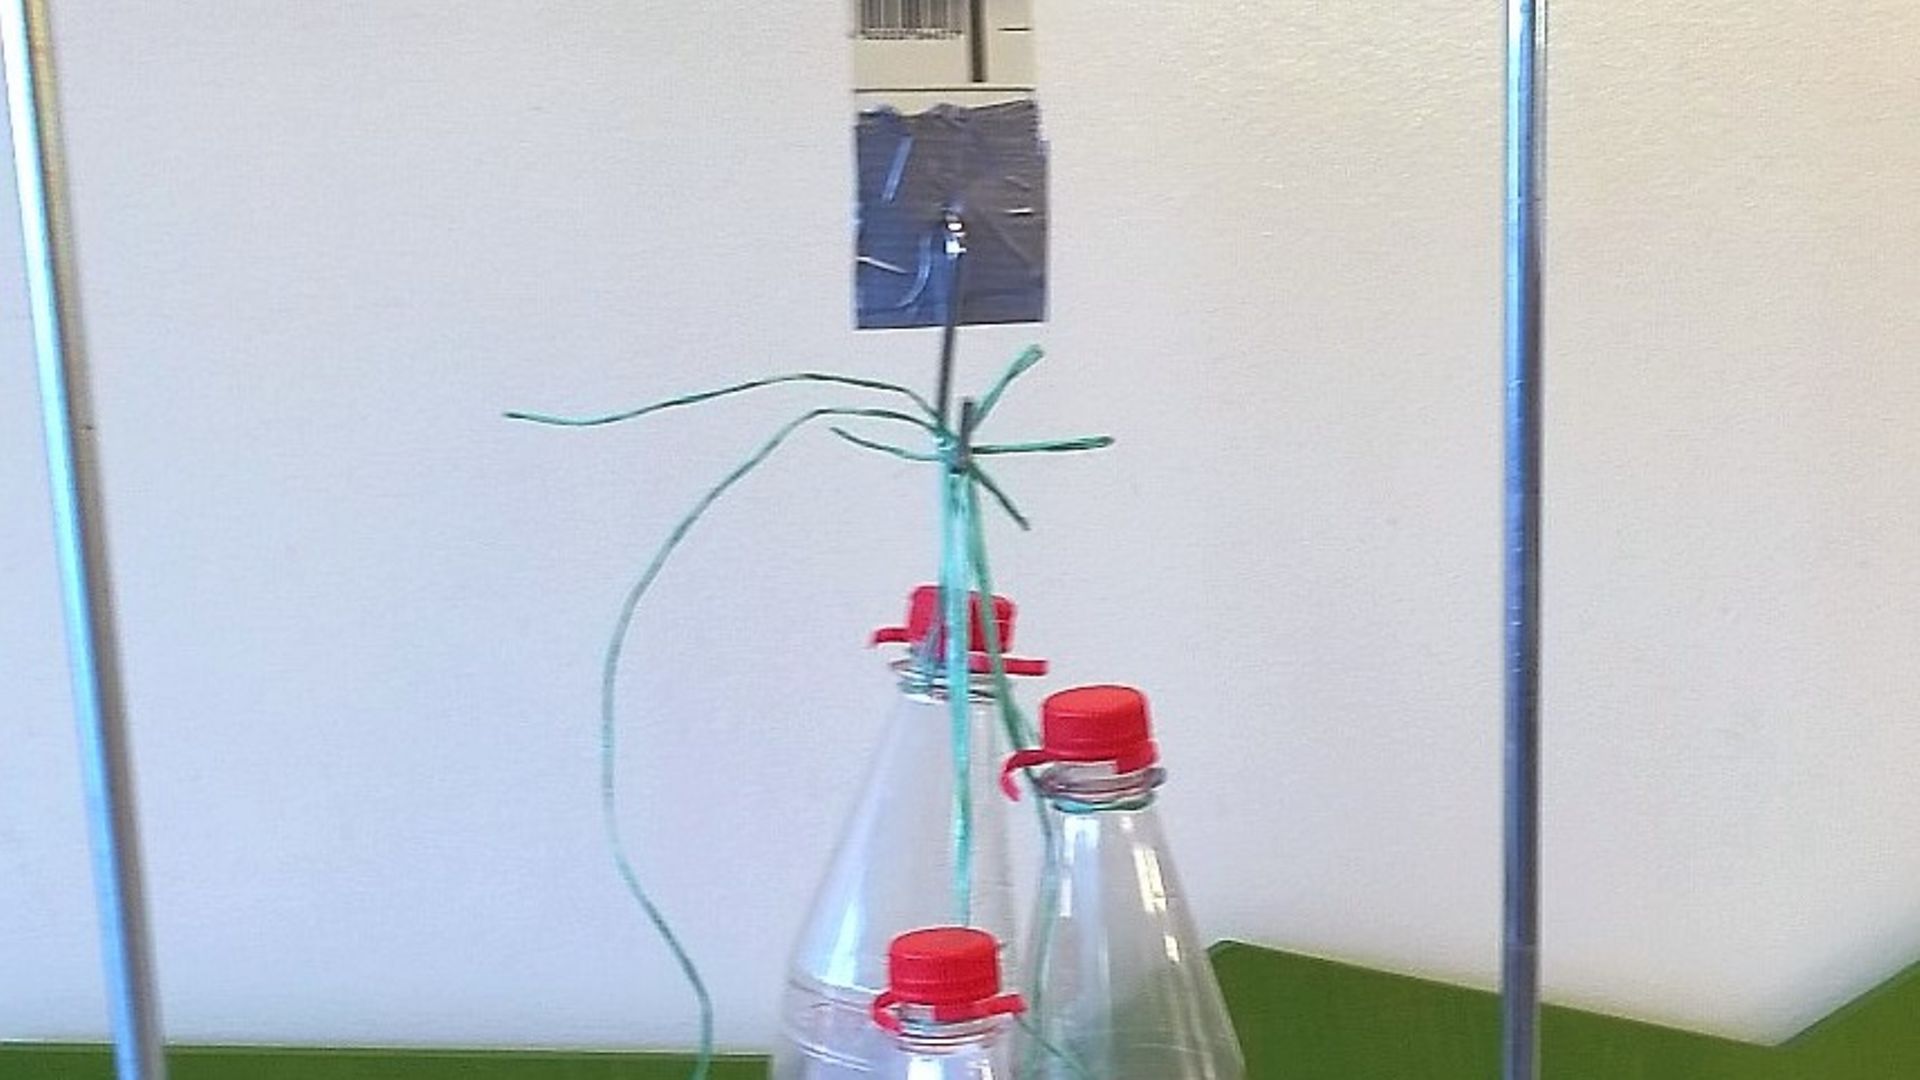 Tripod rod with paper loop hanging from it, from which hang bottles